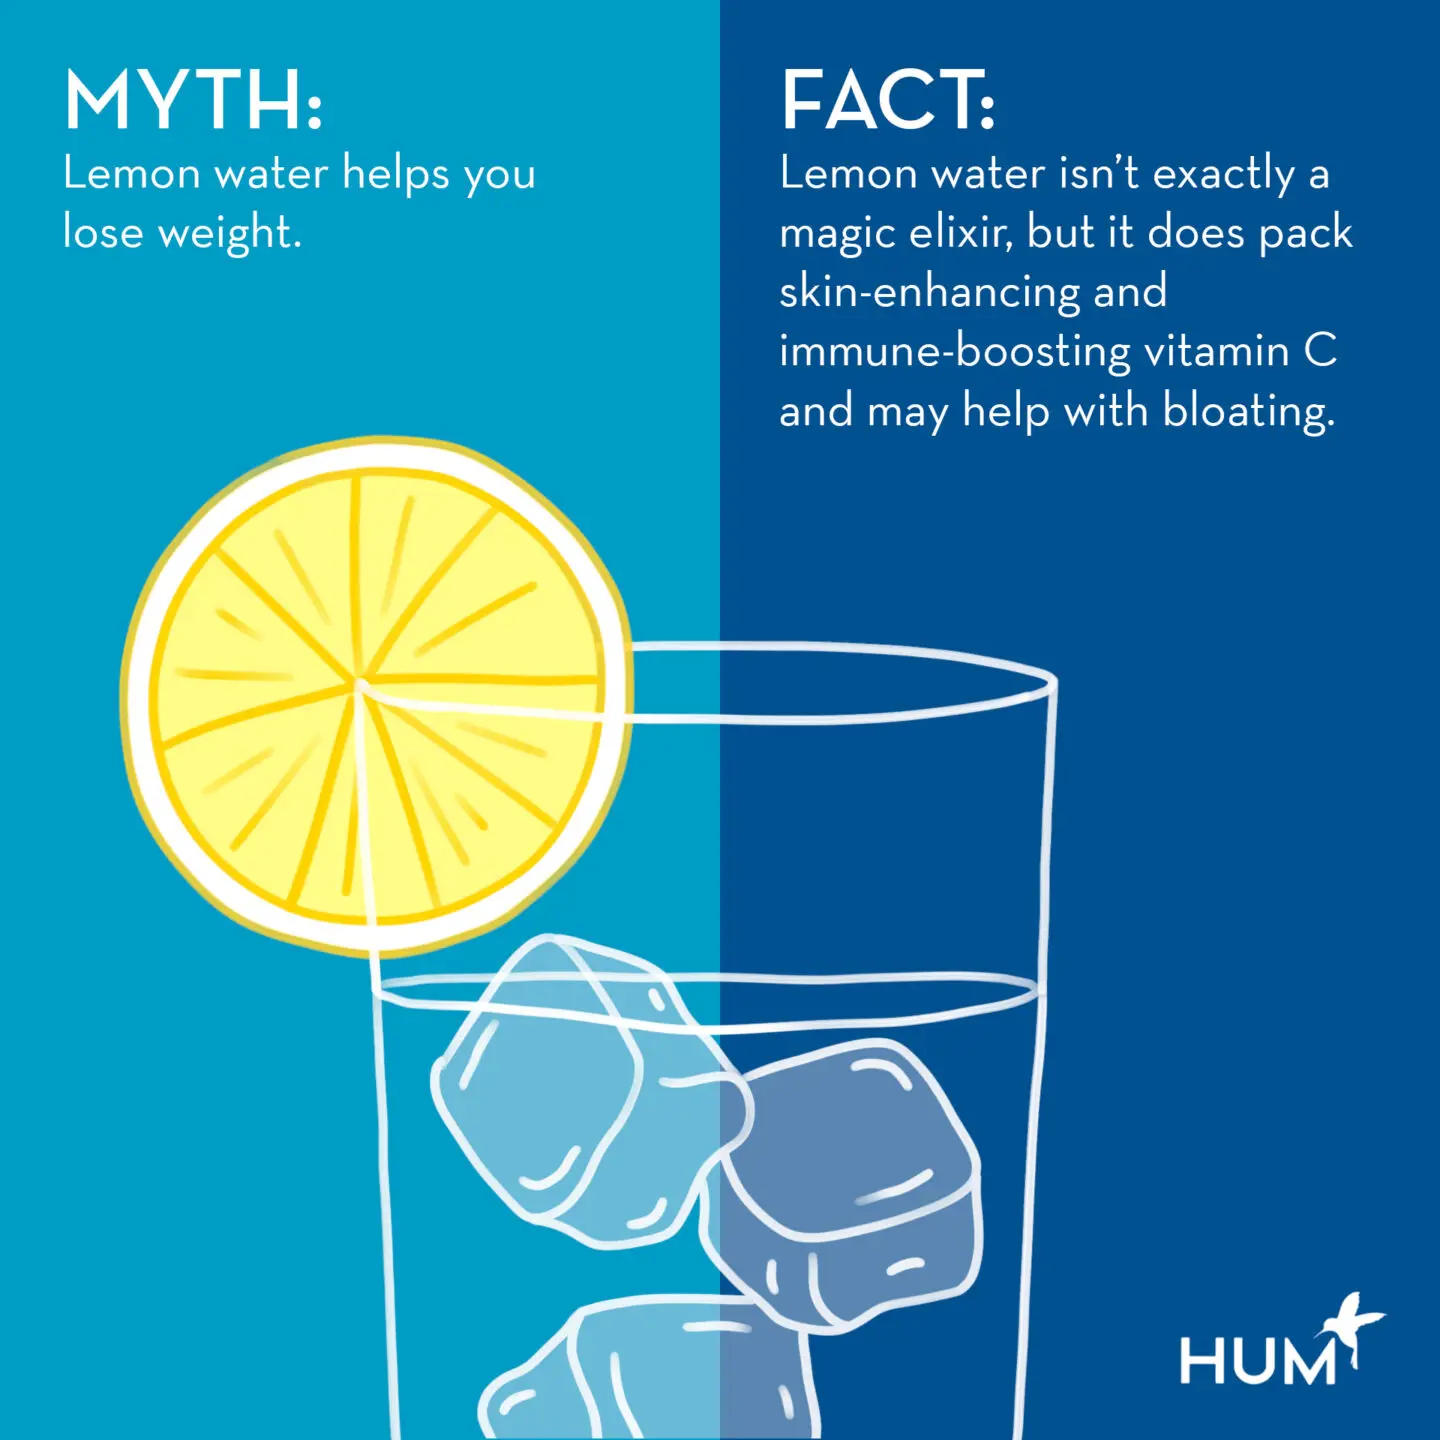 Does Lemon Water Help You Lose Weight? Experts Fact-Check Lemon Water Claims | HUM Nutrition Blog